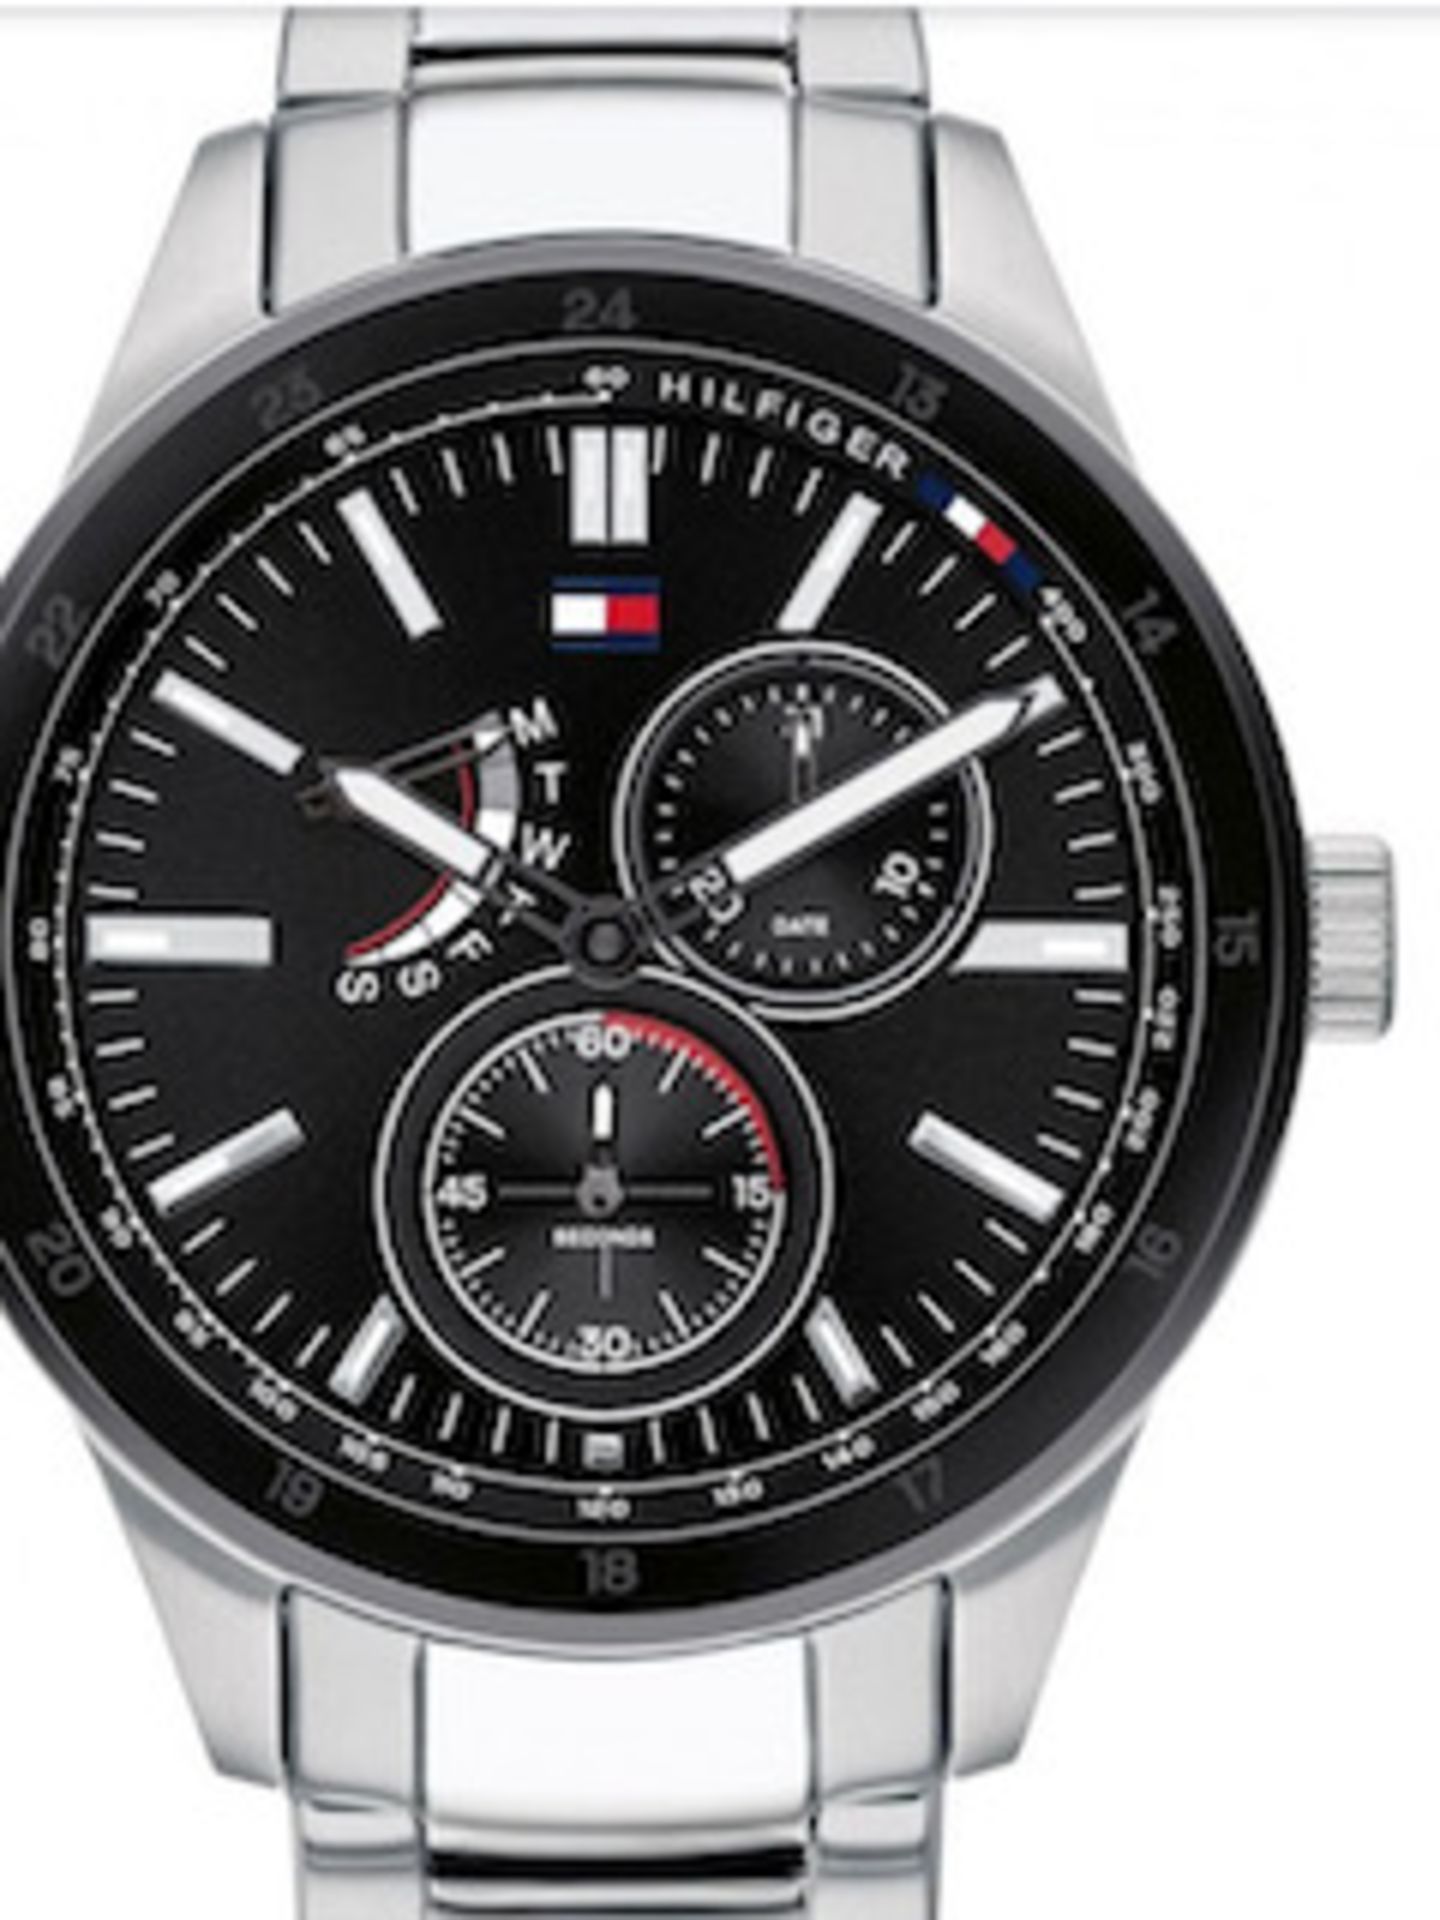 Tommy Hilfiger 1791639 Men's Black And Silver Stainless Steel Bracelet Watch - Image 5 of 7